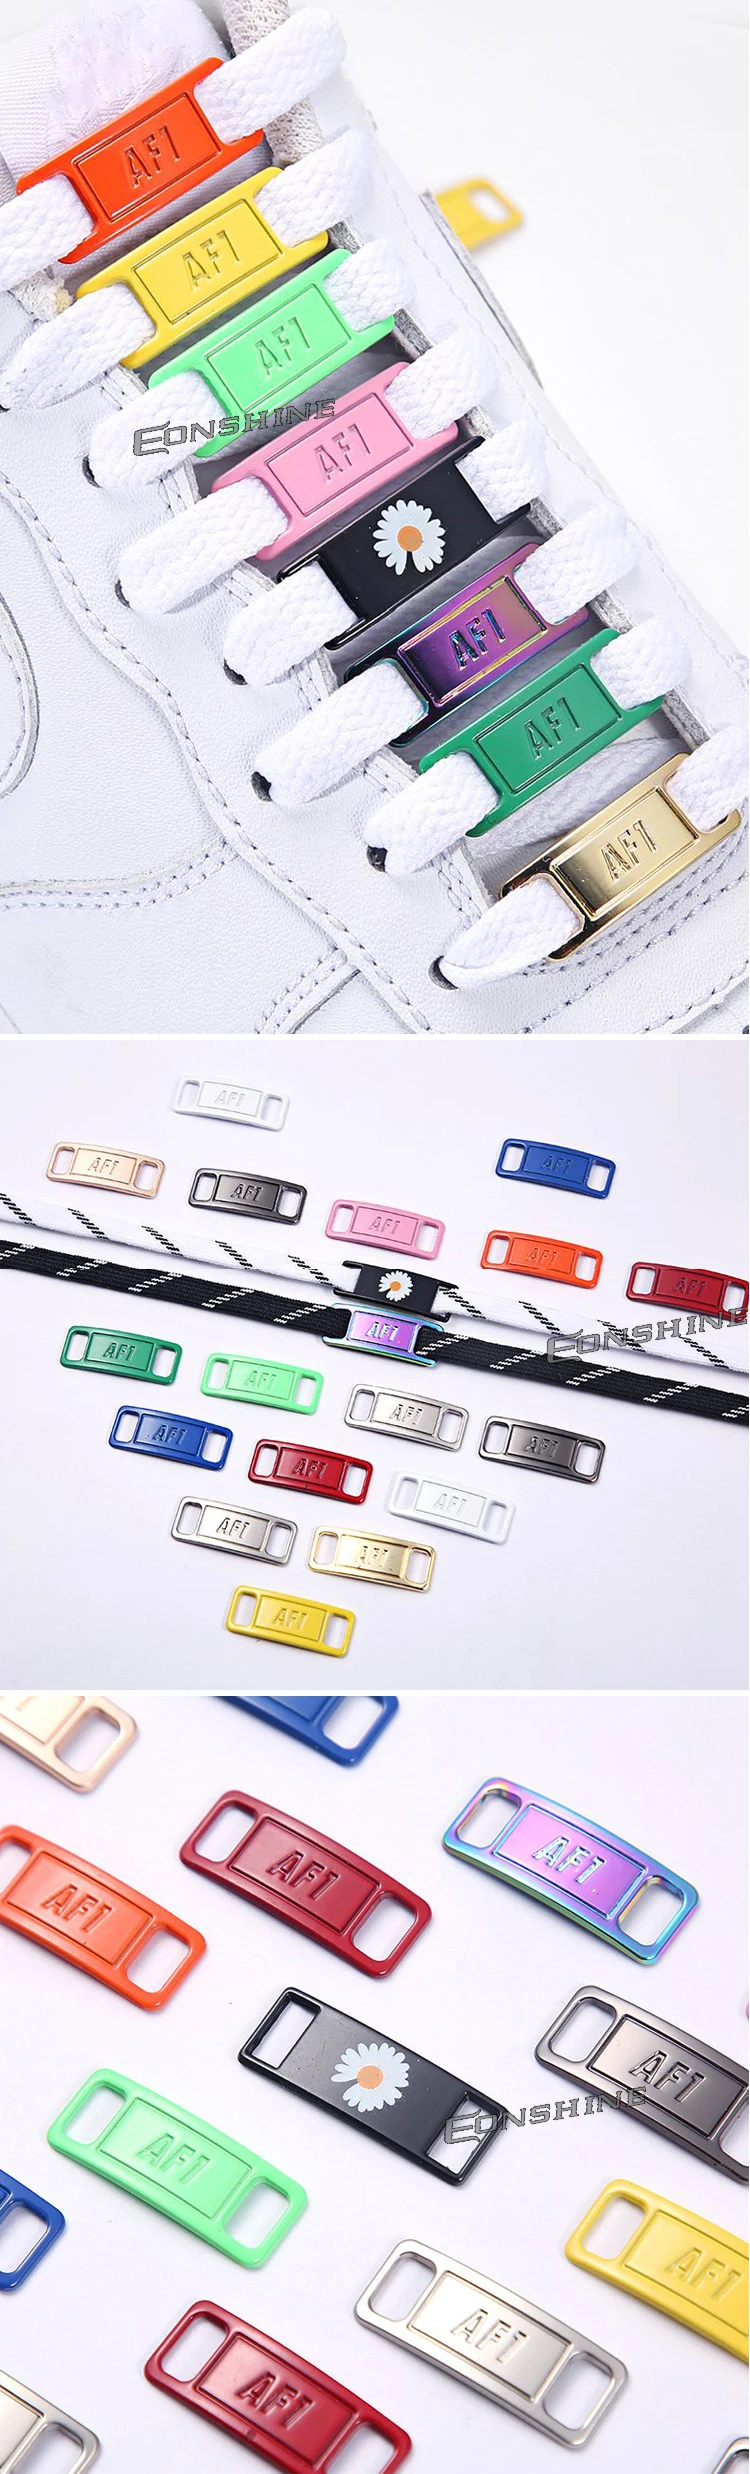 Diy 2Pcs/Pair Af1 Airforce Metal Decorative Shoe Lace Charms Tags Buckle Shoelaces Accessories Lock for Sneaker